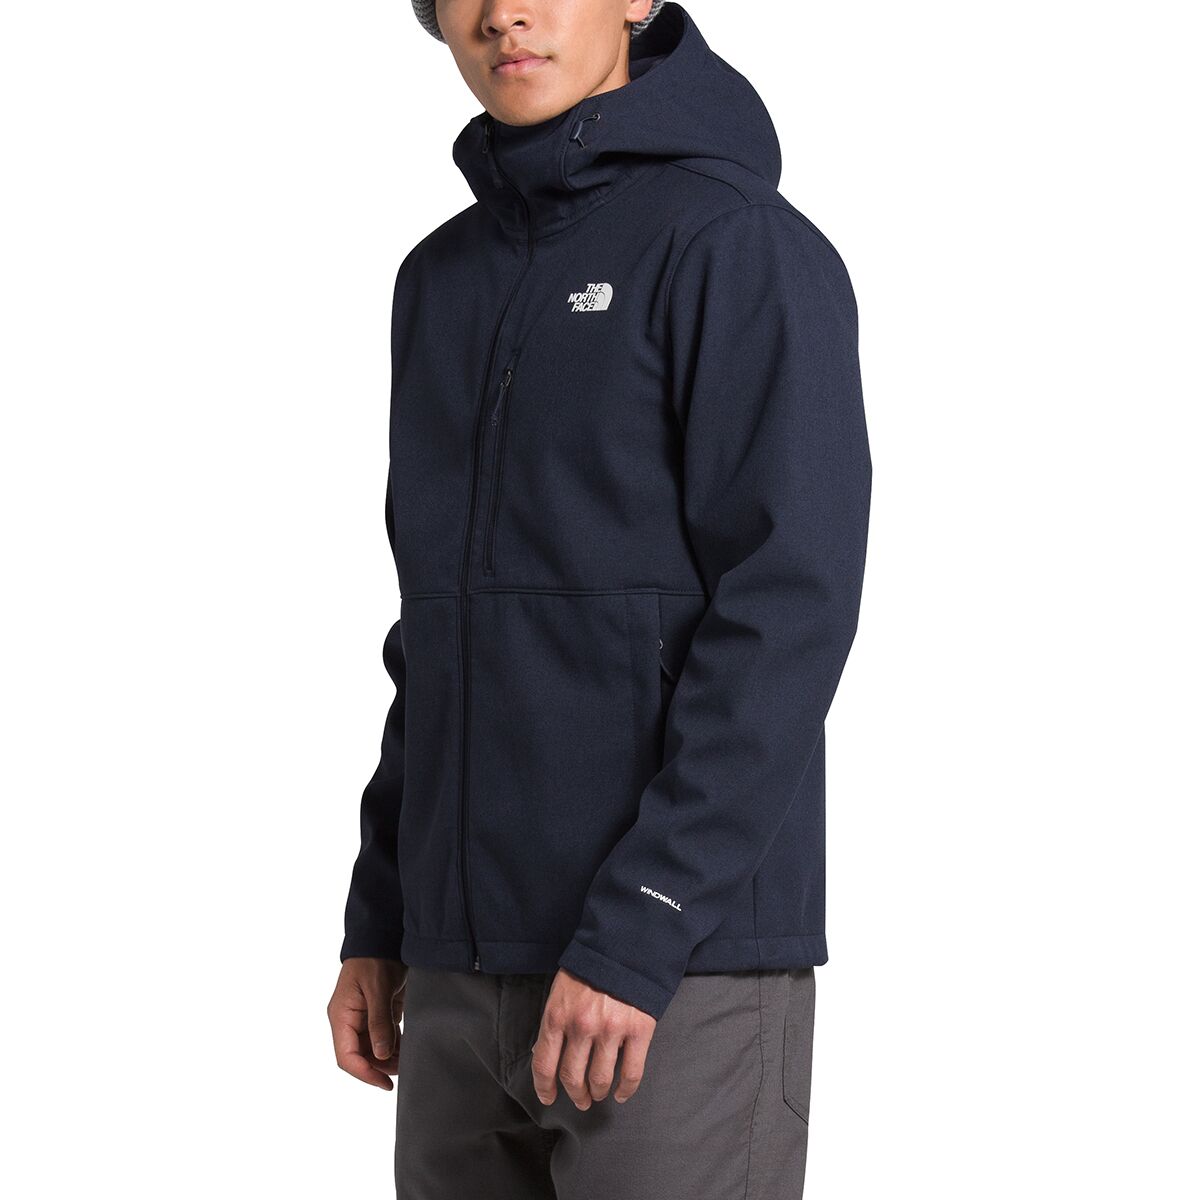 The North Face Apex Bionic 2 Hooded Softshell Jacket - Men's 